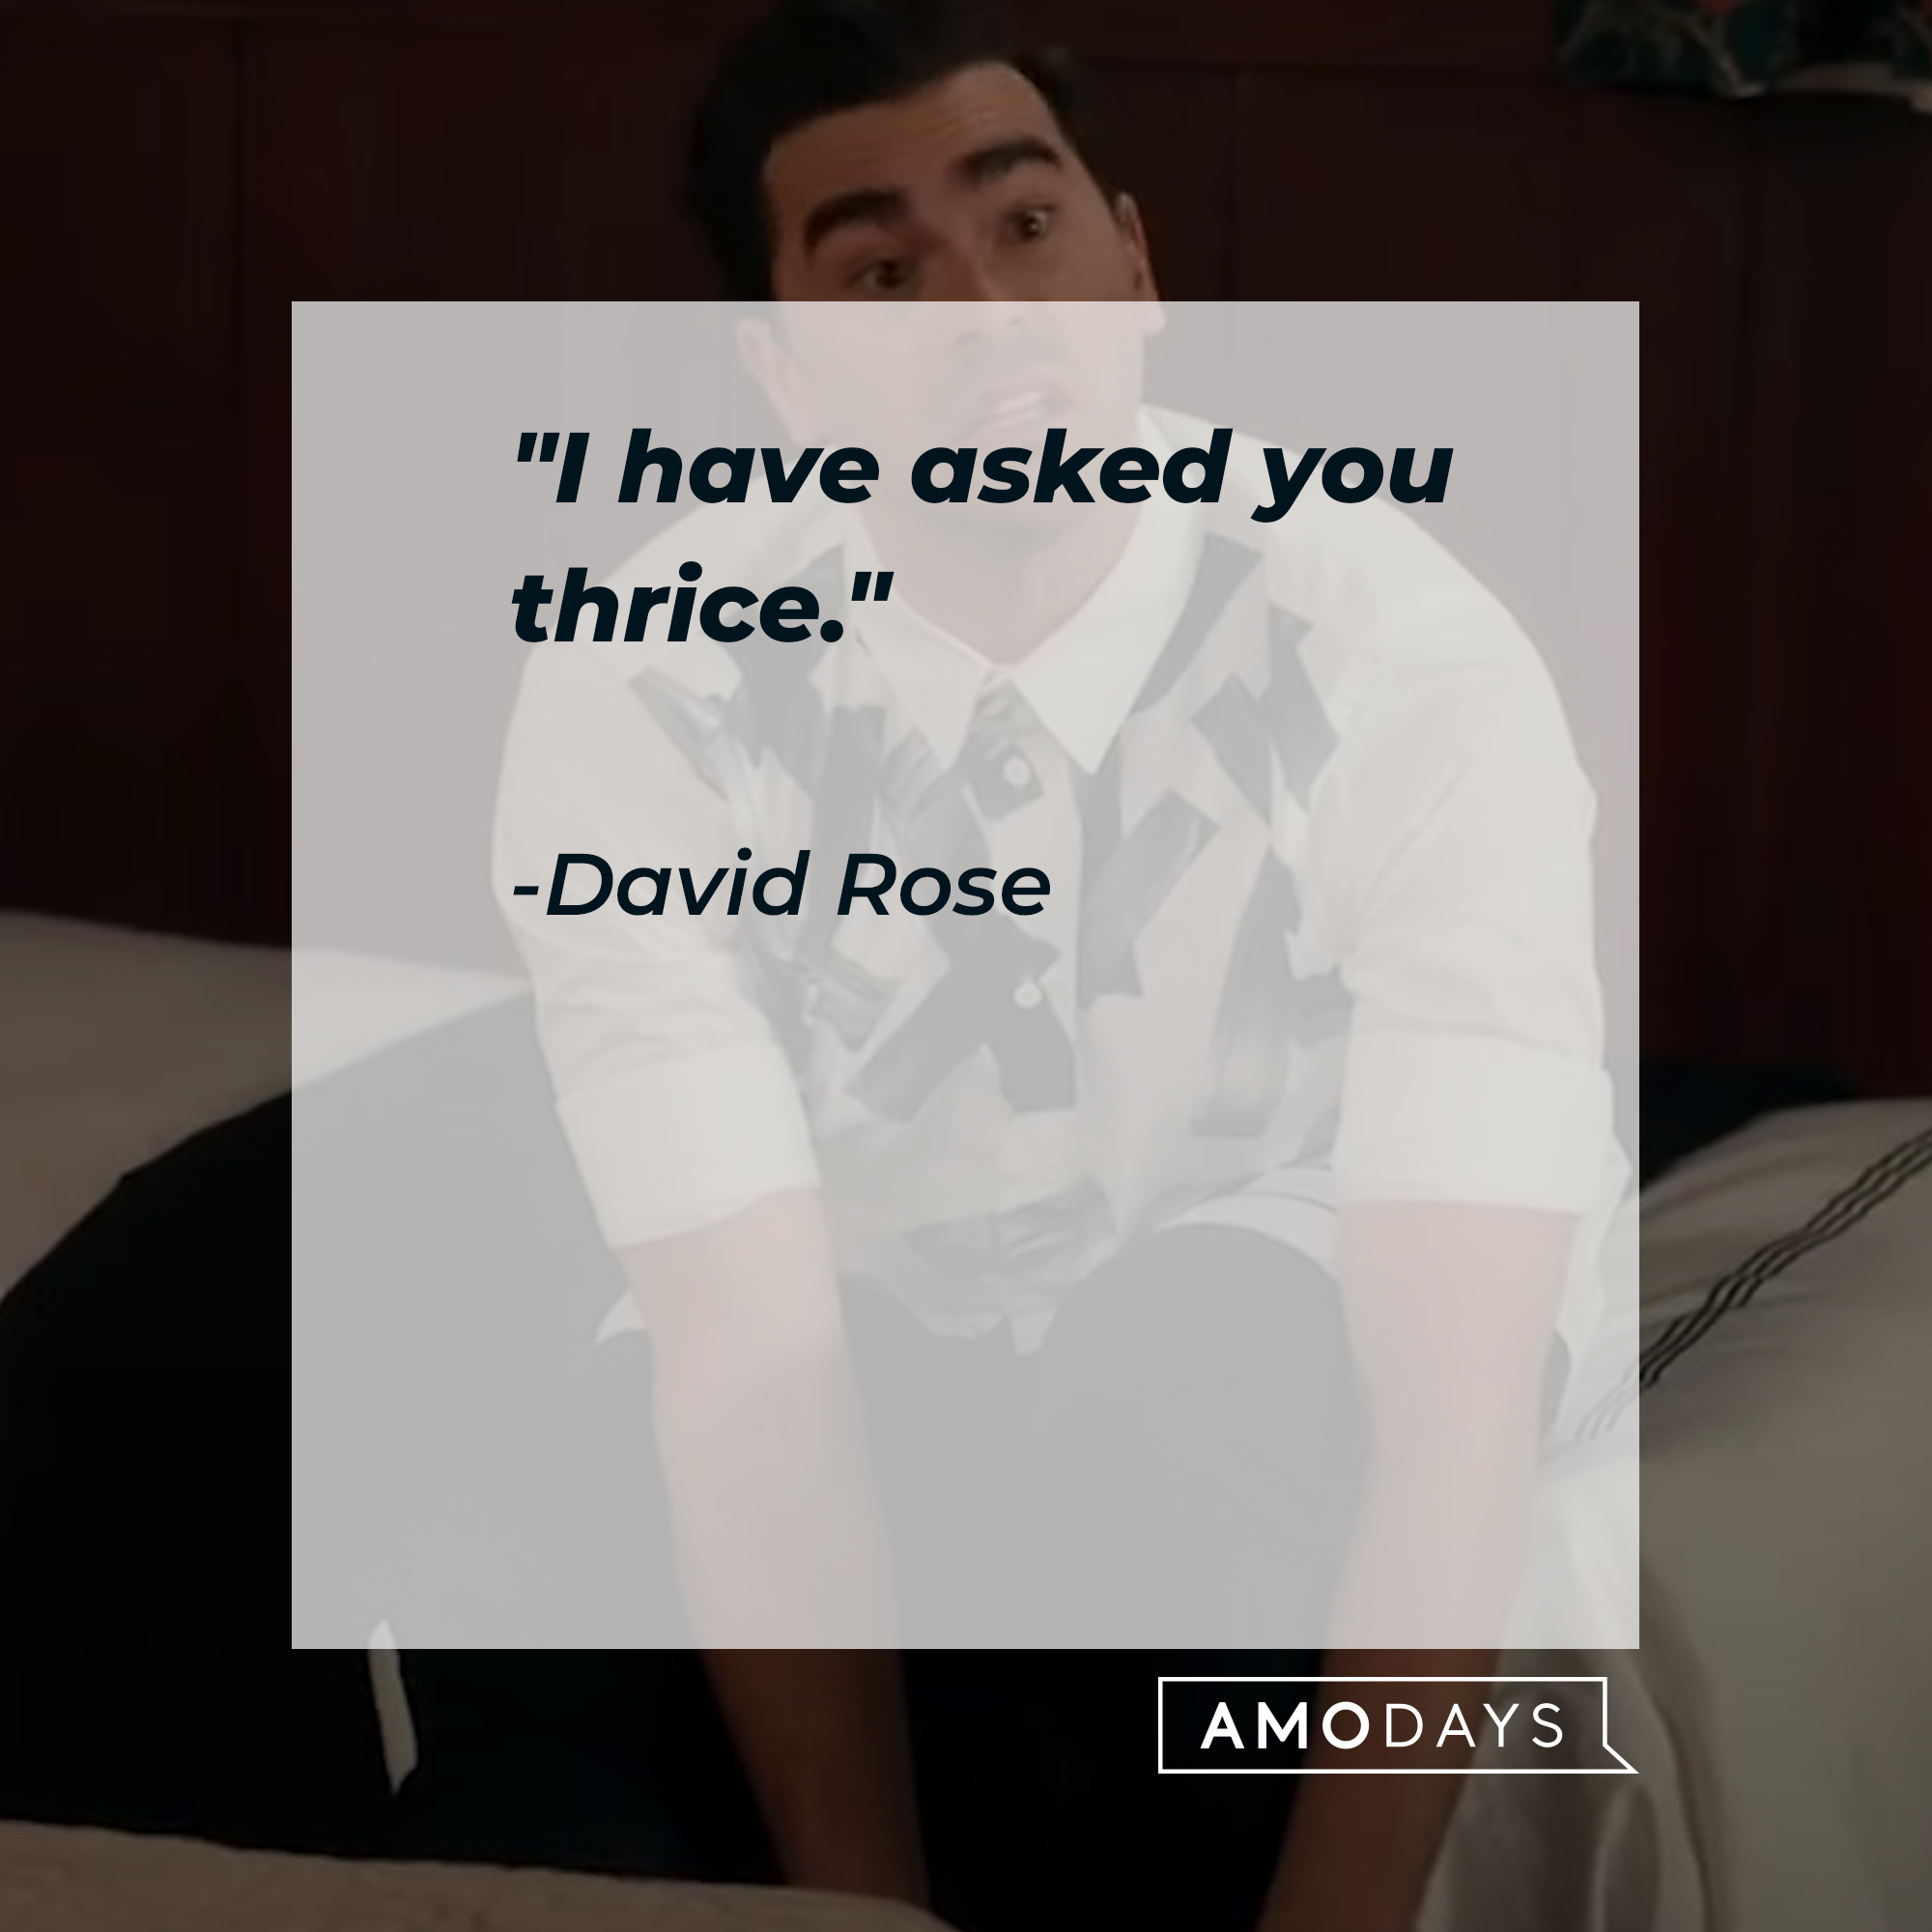 A photo of David Rose with the quote, "I have asked you thrice." | Source: YouTube/PopTVVideo